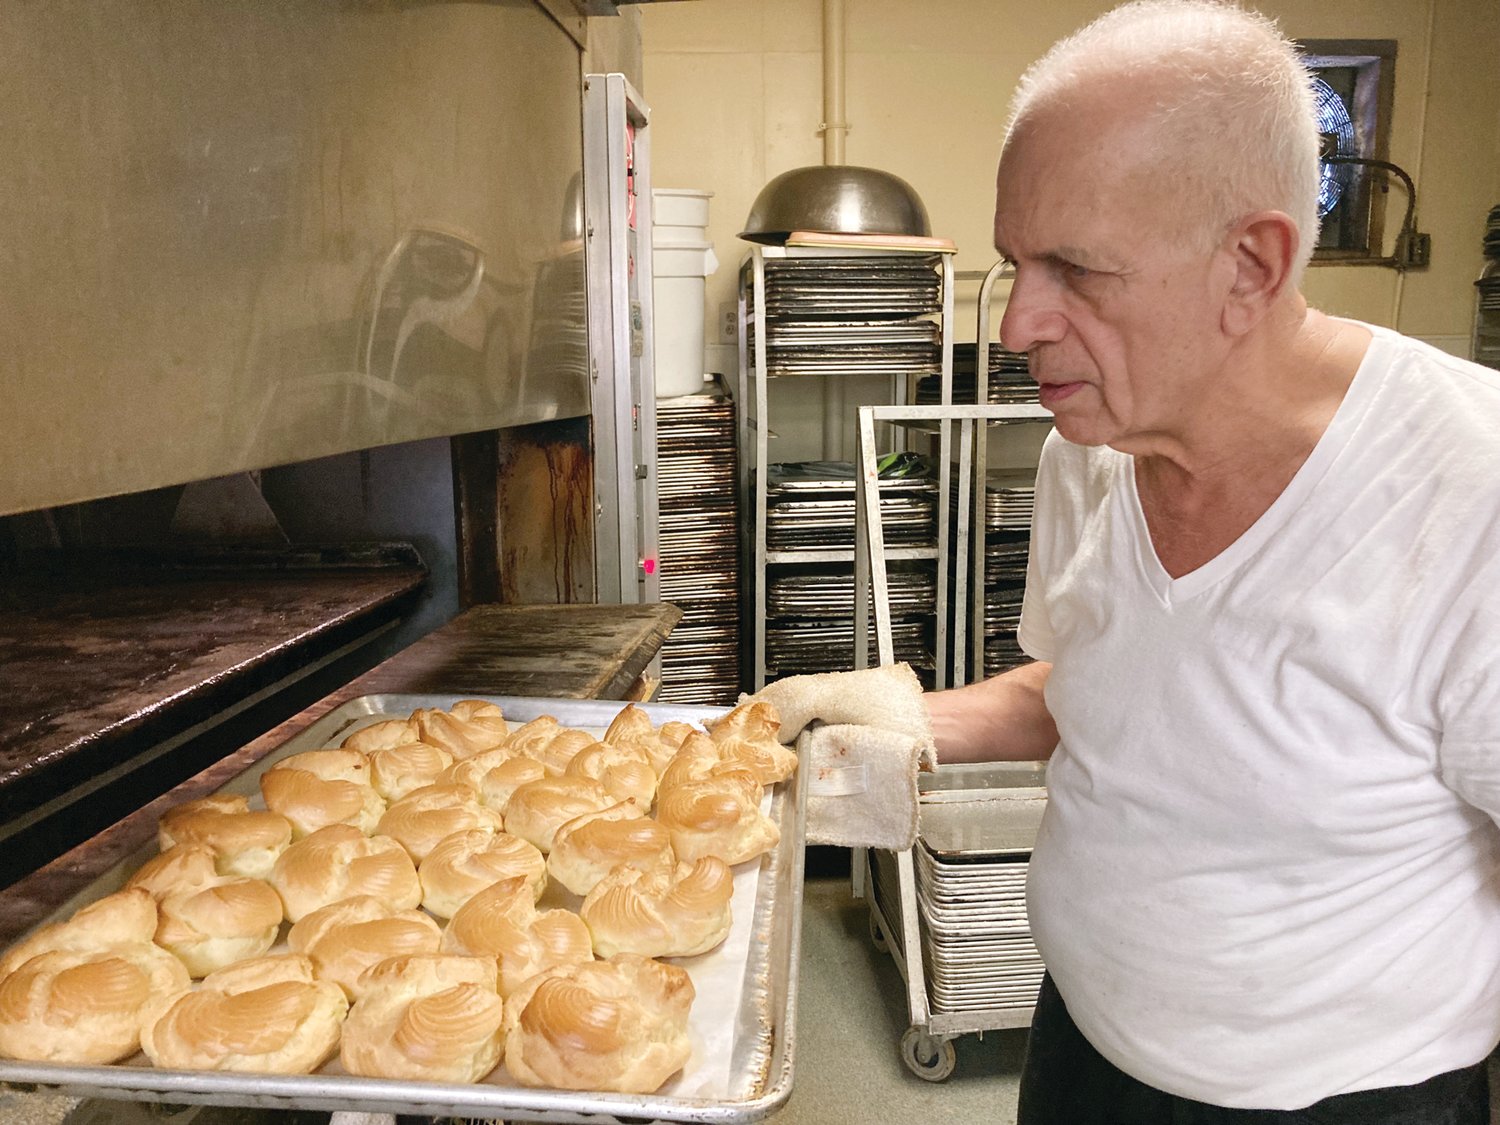 PEAK INTO THE OVEN: DePetrillo checks on zeppoles that were in the oven. He puts them back in since they’re not quite ready.